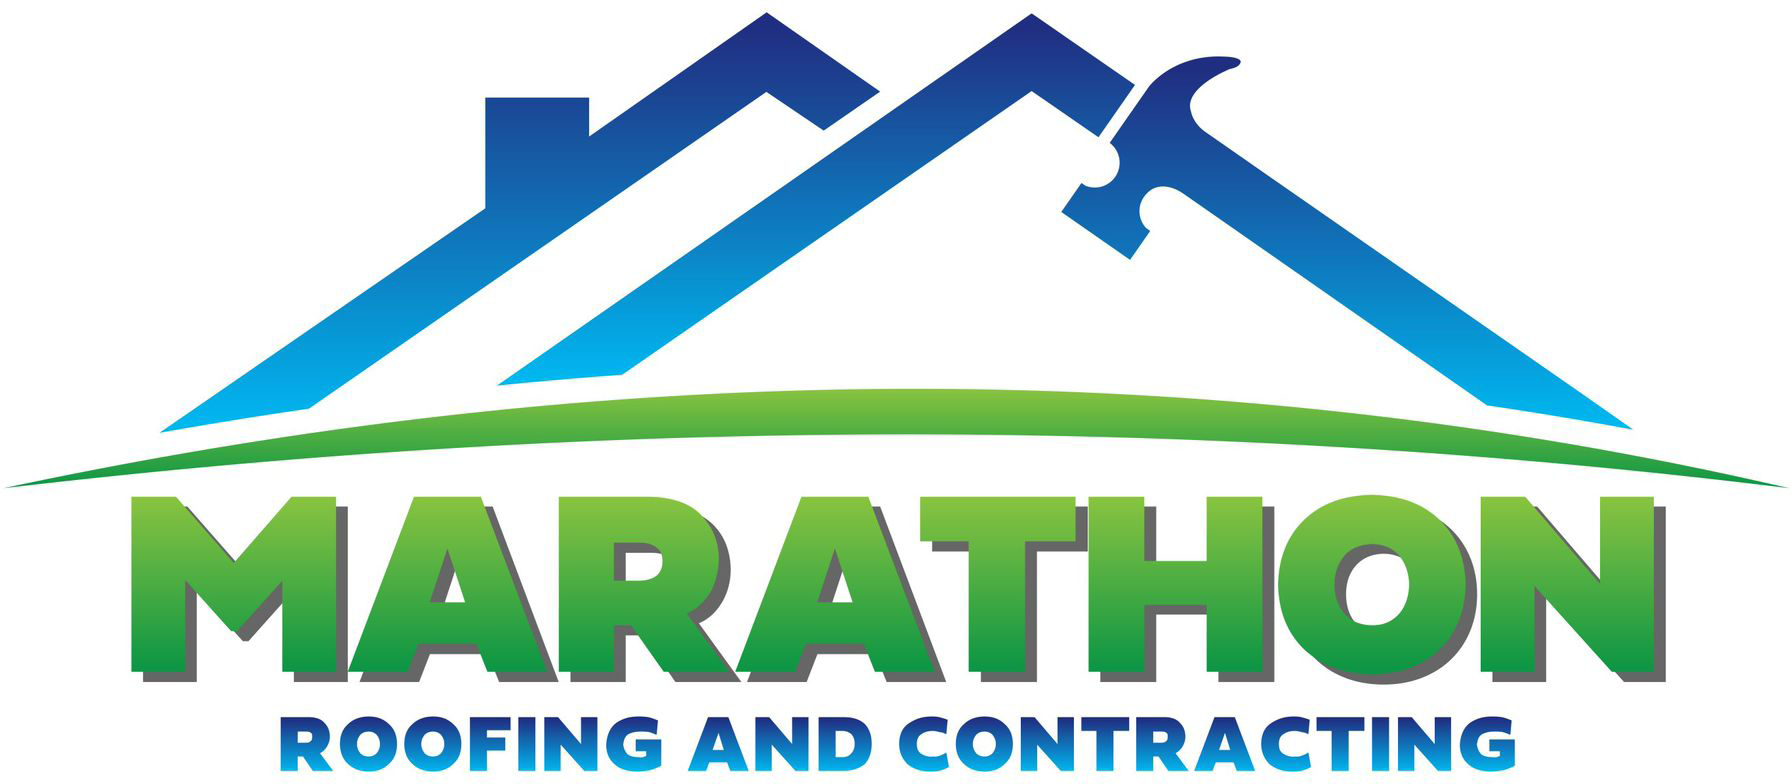 Marathon roofing and contracting logo.